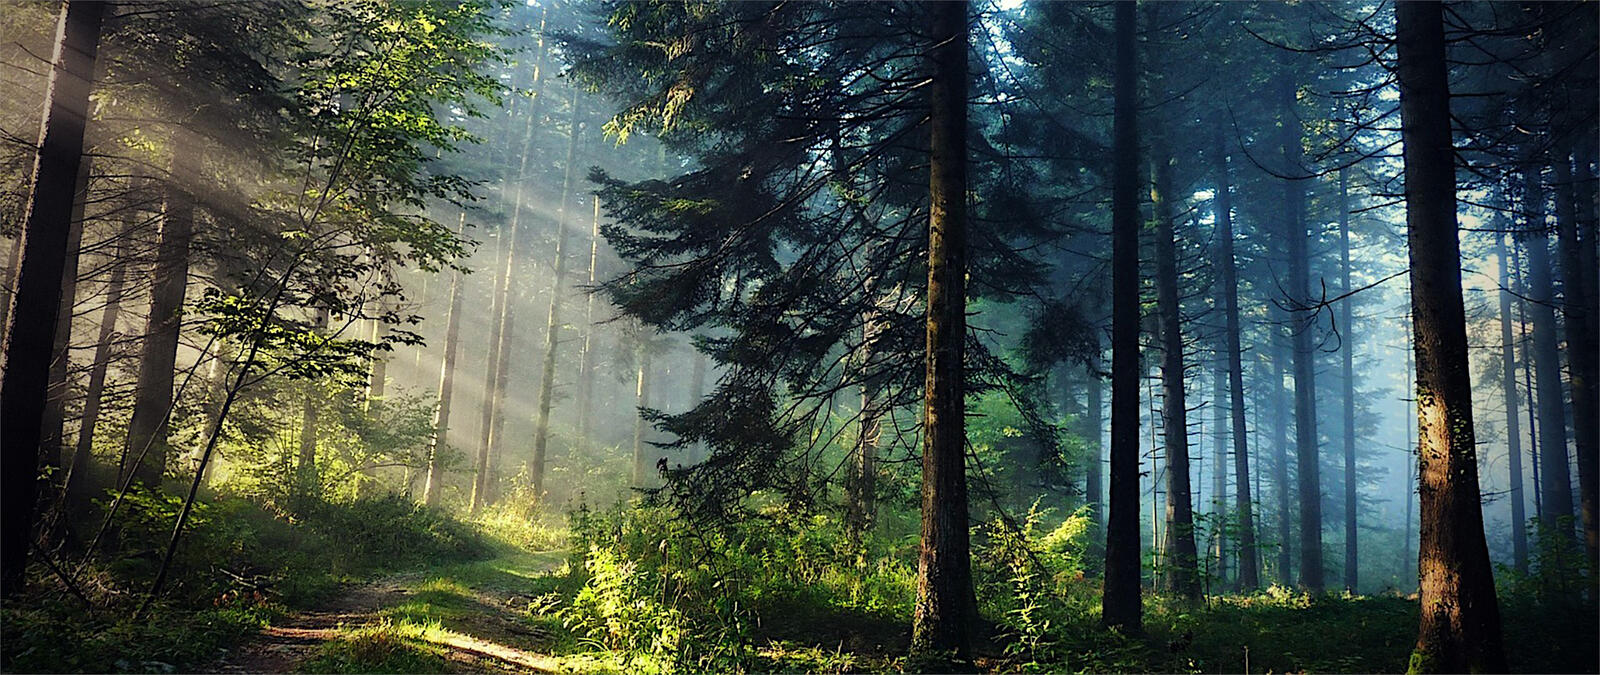 Free photo Sunlight illuminates a dirt road in a coniferous forest